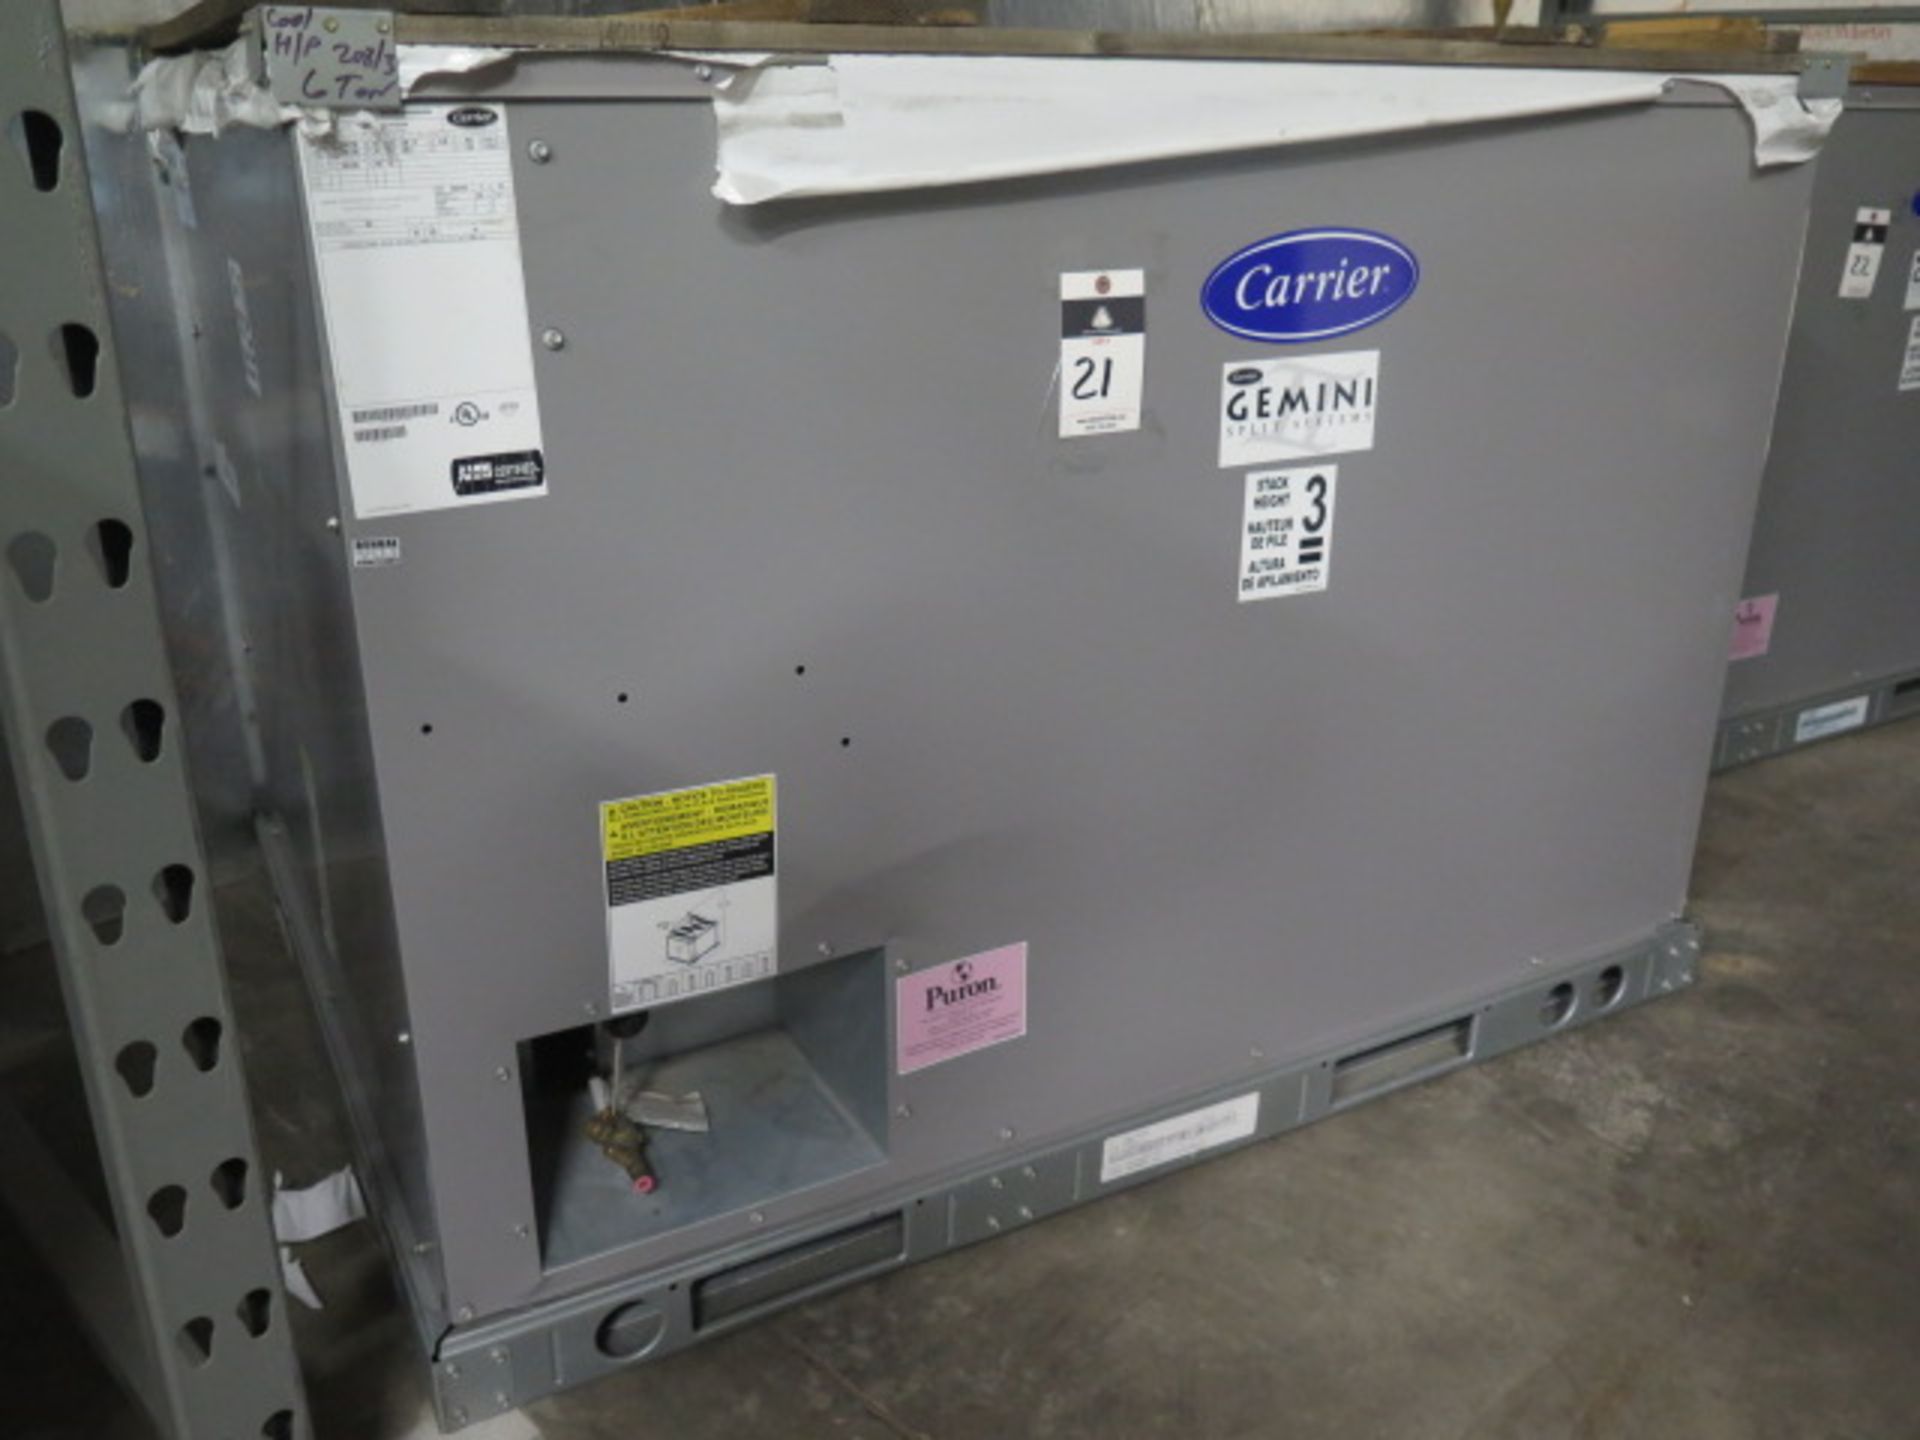 Carrier “Gemini Split Systems” 38AUQA07A0A5-0A0A0 6 Ton Dual Voltage Heat Pump Air Conditioners, - Image 3 of 8